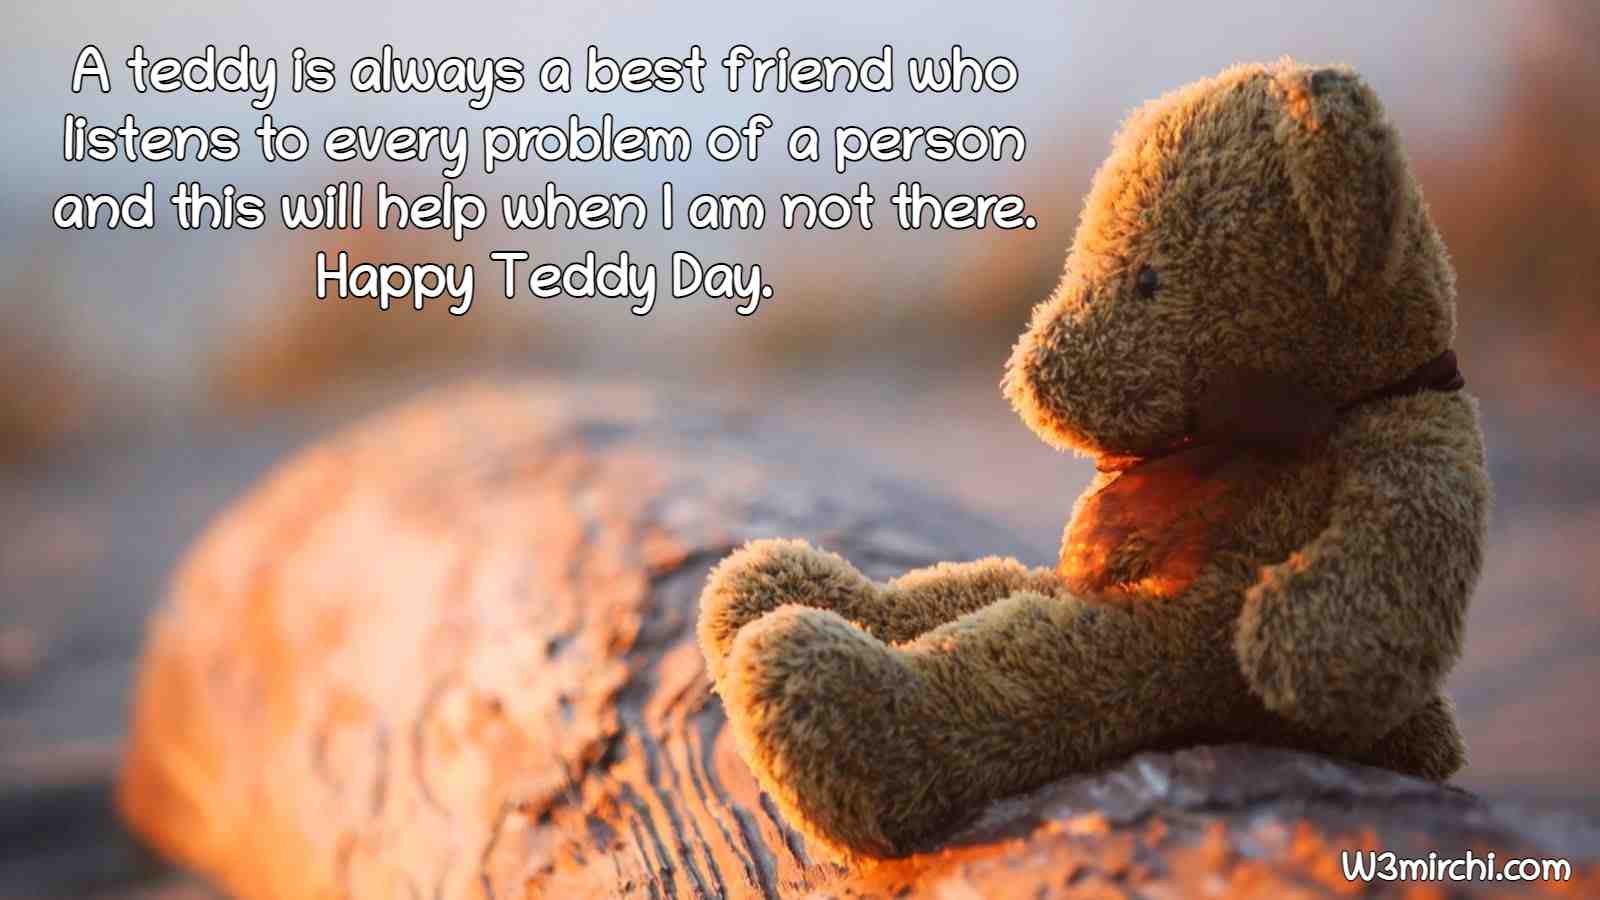 A teddy is always a best friend who listens to